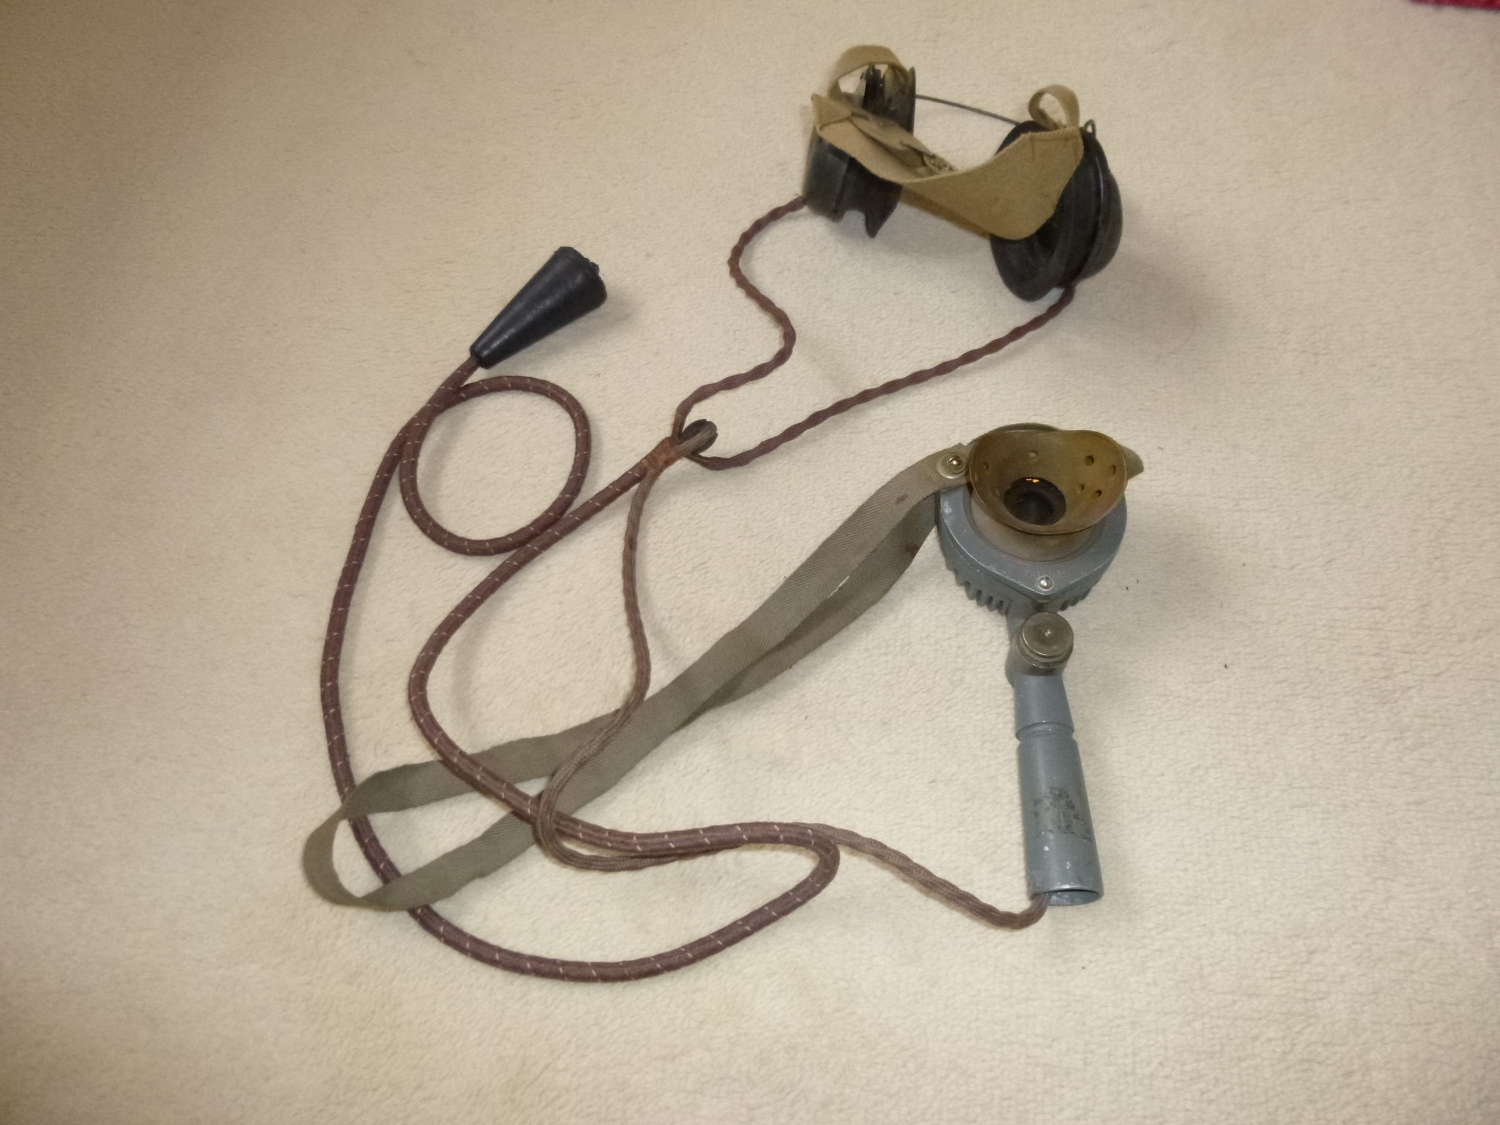 British Army tanker's Tannoy microphone/headset